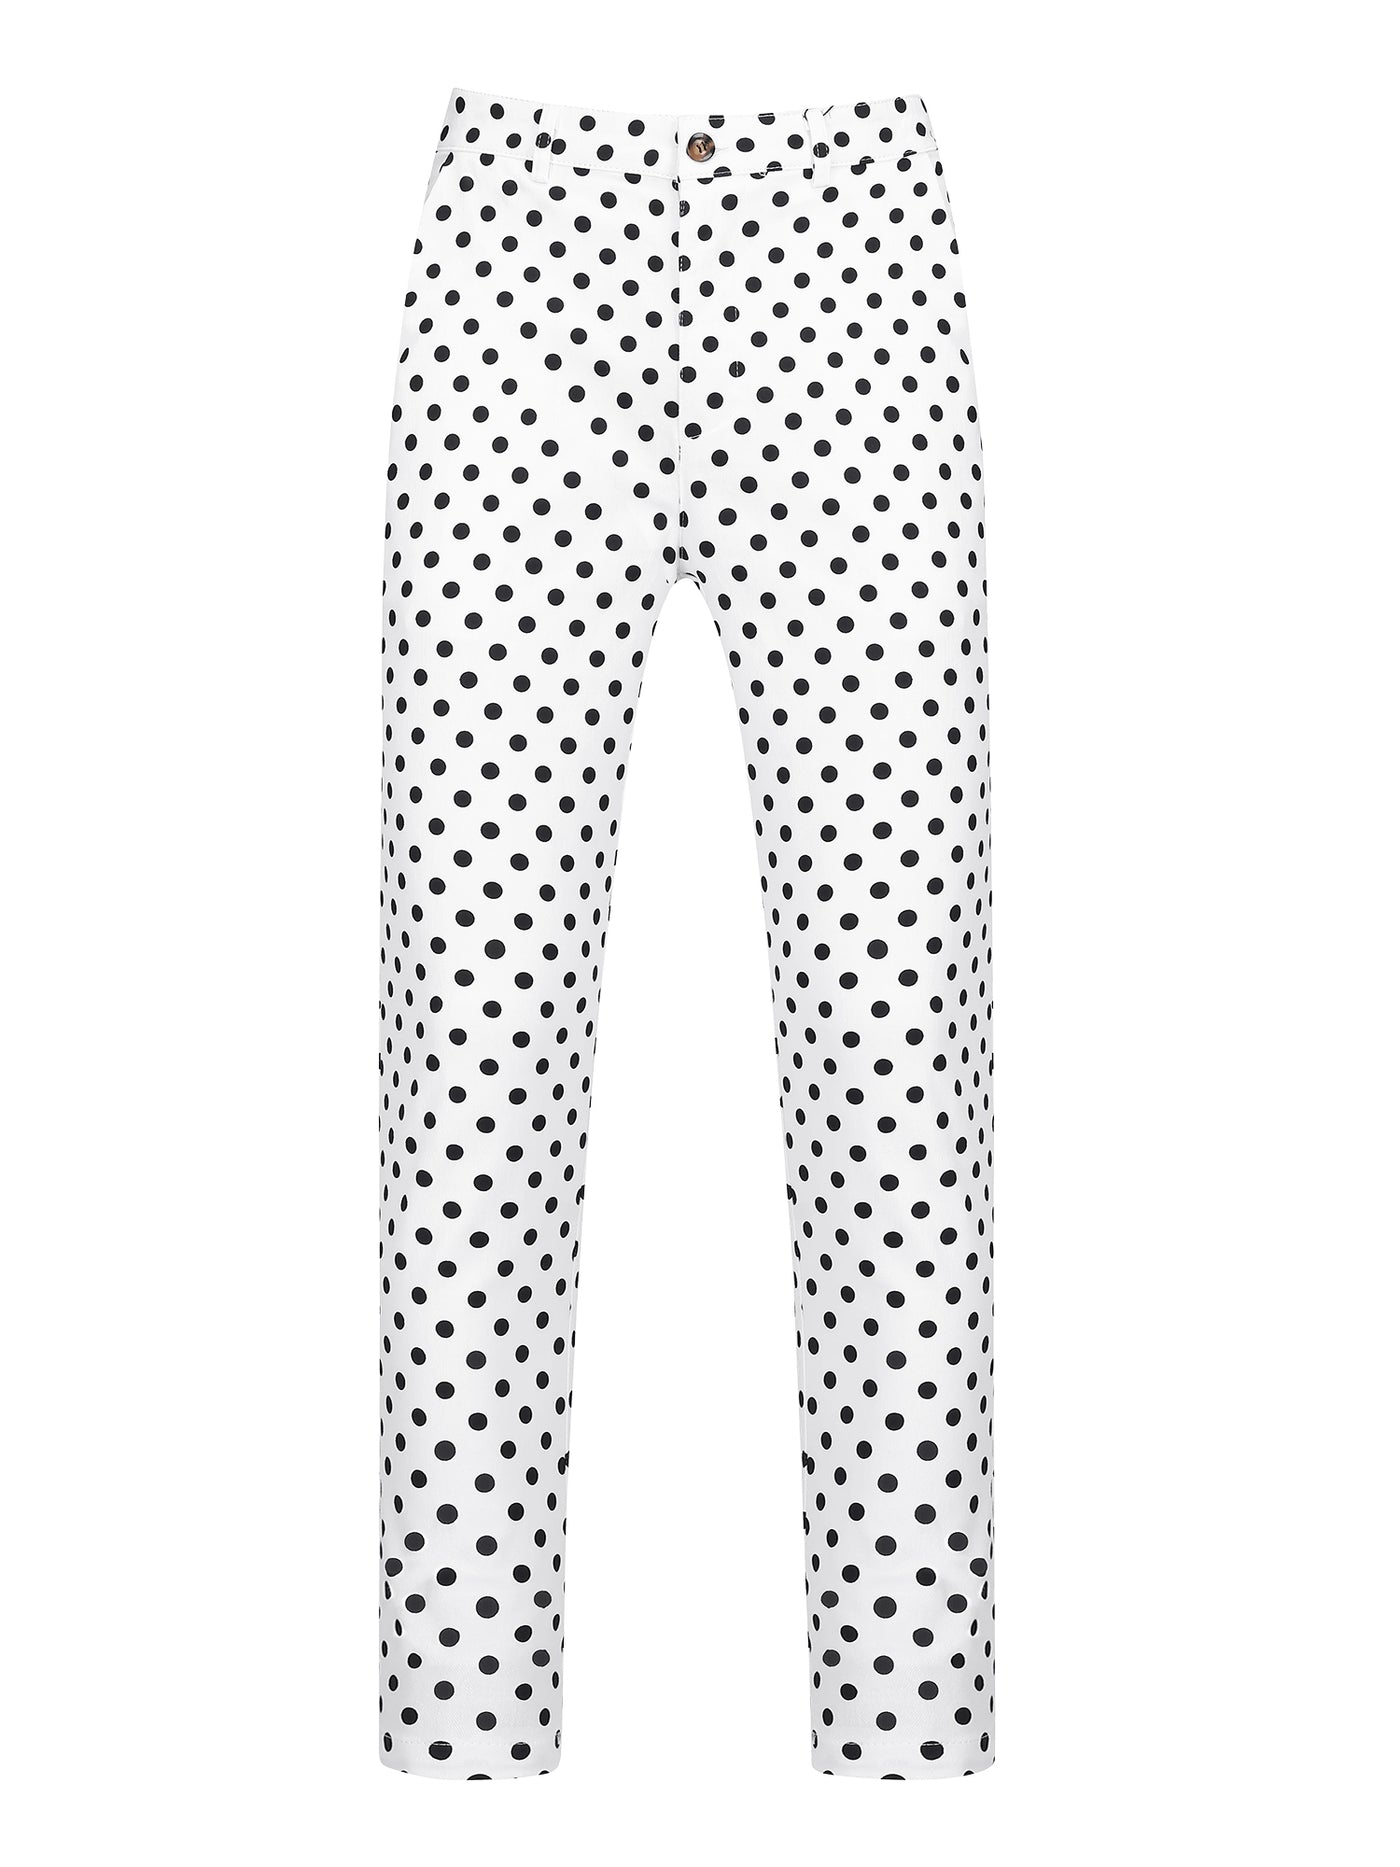 Bublédon Polka Dots Dress Pants for Men's Flat Front Business Wedding Chino Trousers